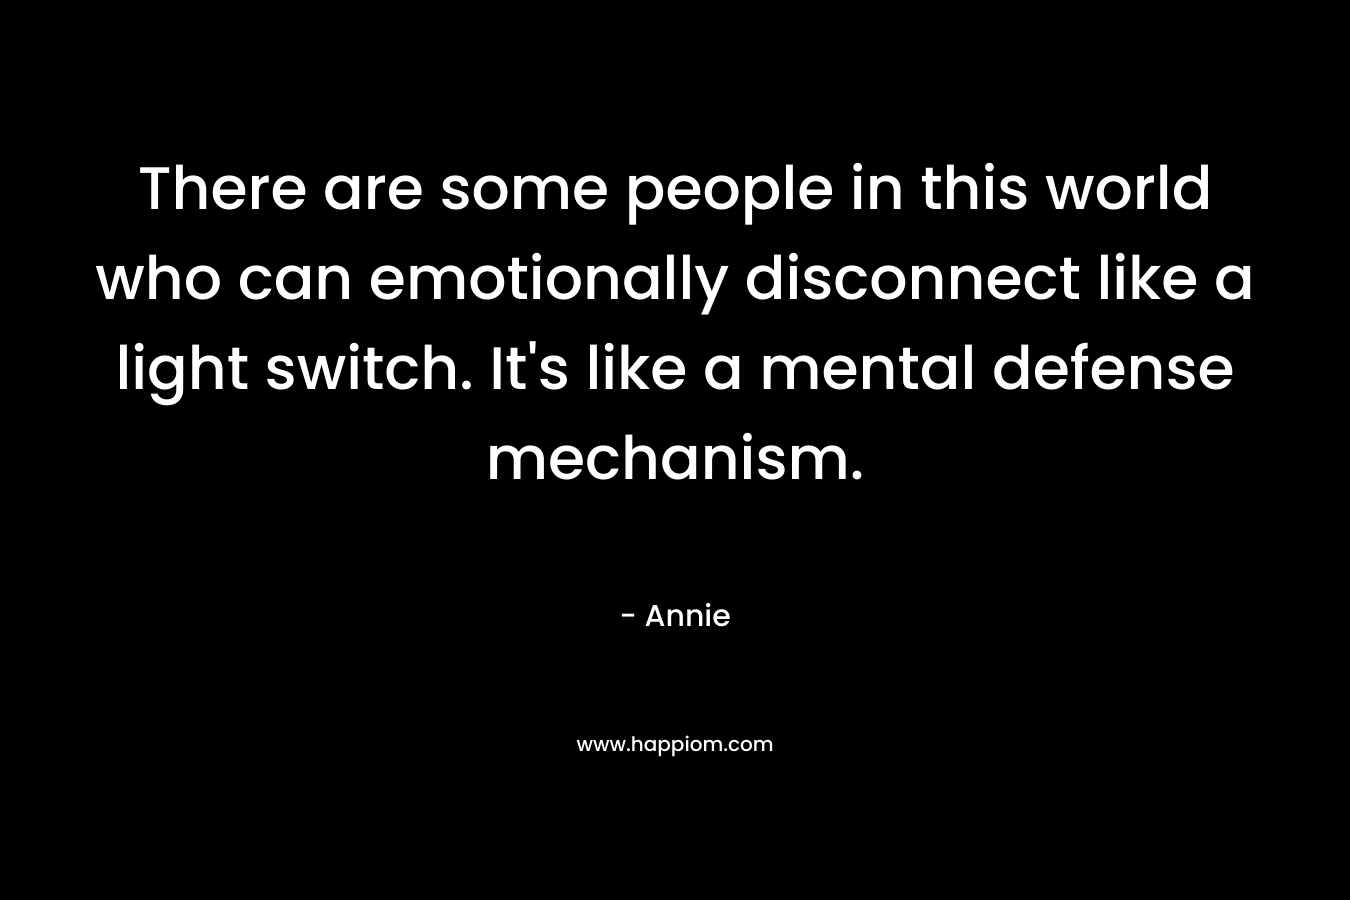 There are some people in this world who can emotionally disconnect like a light switch. It’s like a mental defense mechanism. – Annie